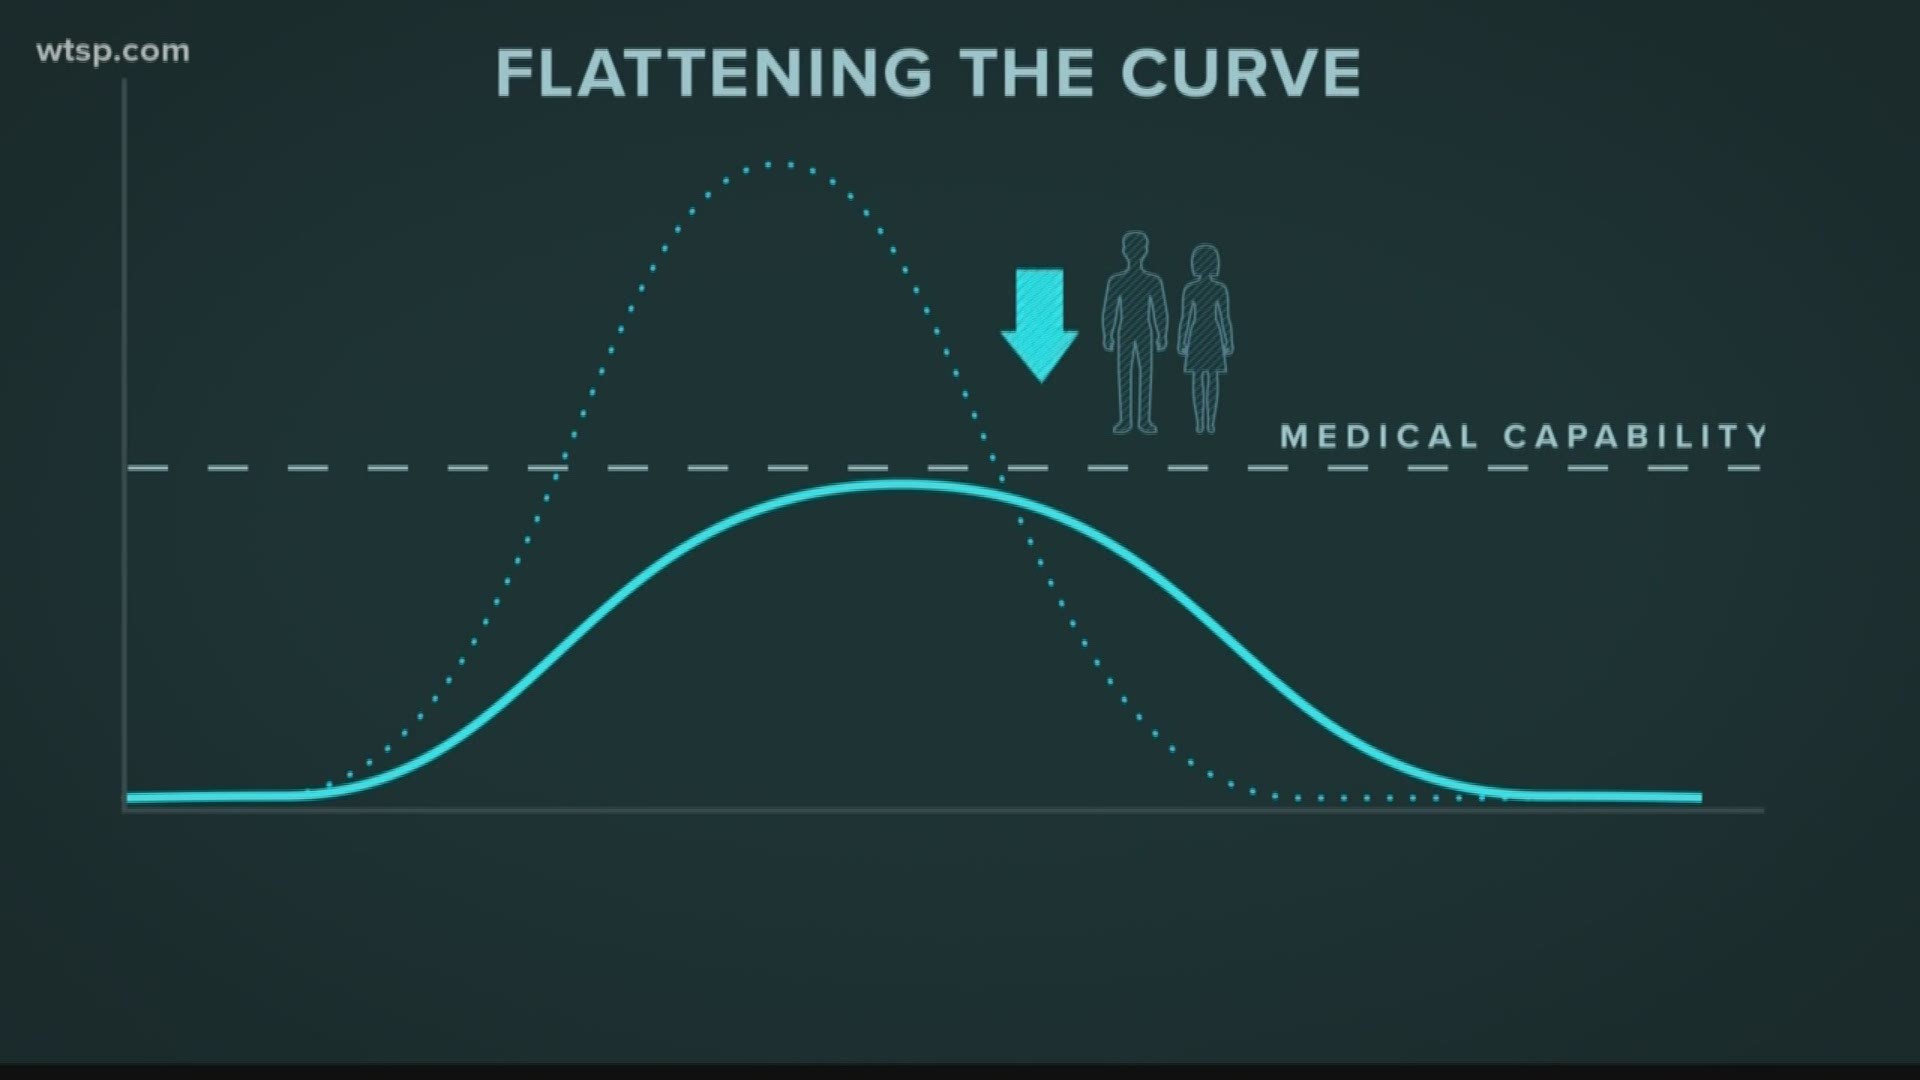 The epidemic curve is the term epidemiologists use to describe the lifespan of a disease outbreak.